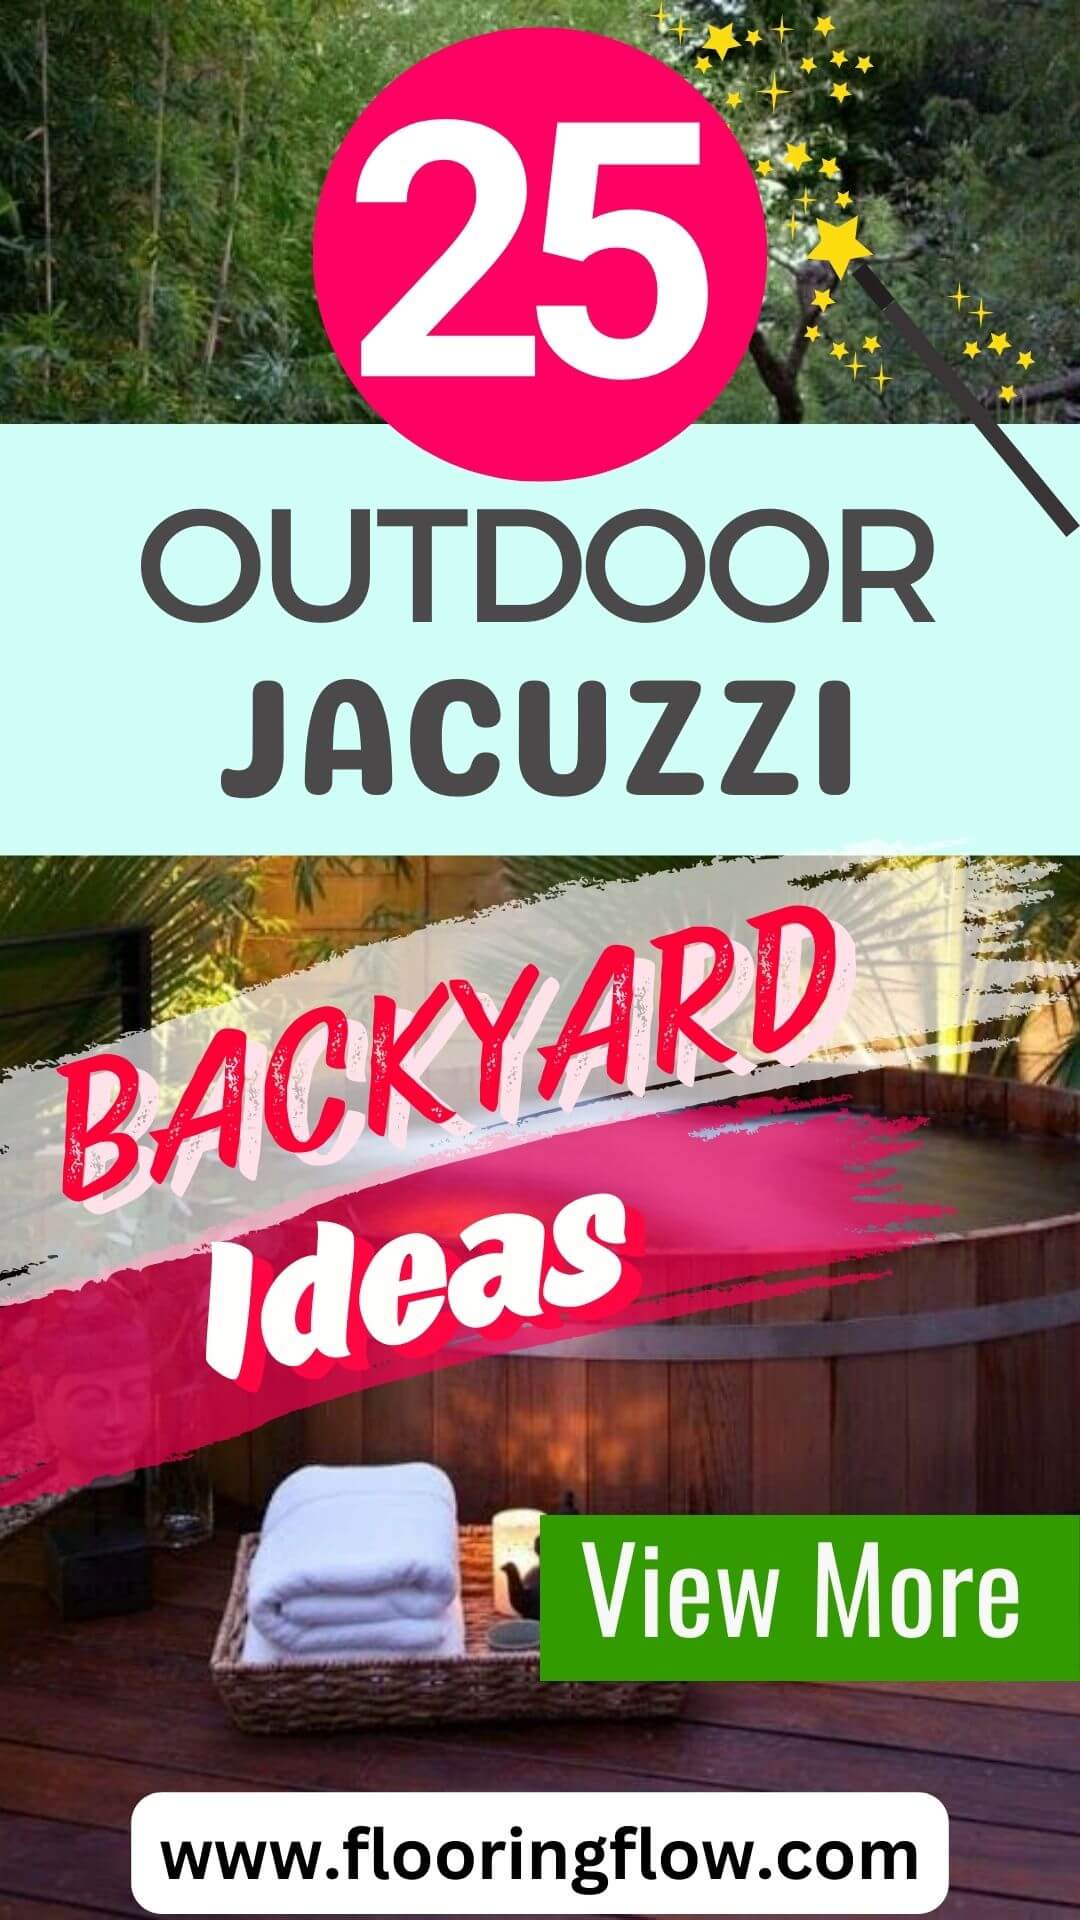 Outdoor Jacuzzi Ideas For Backyard